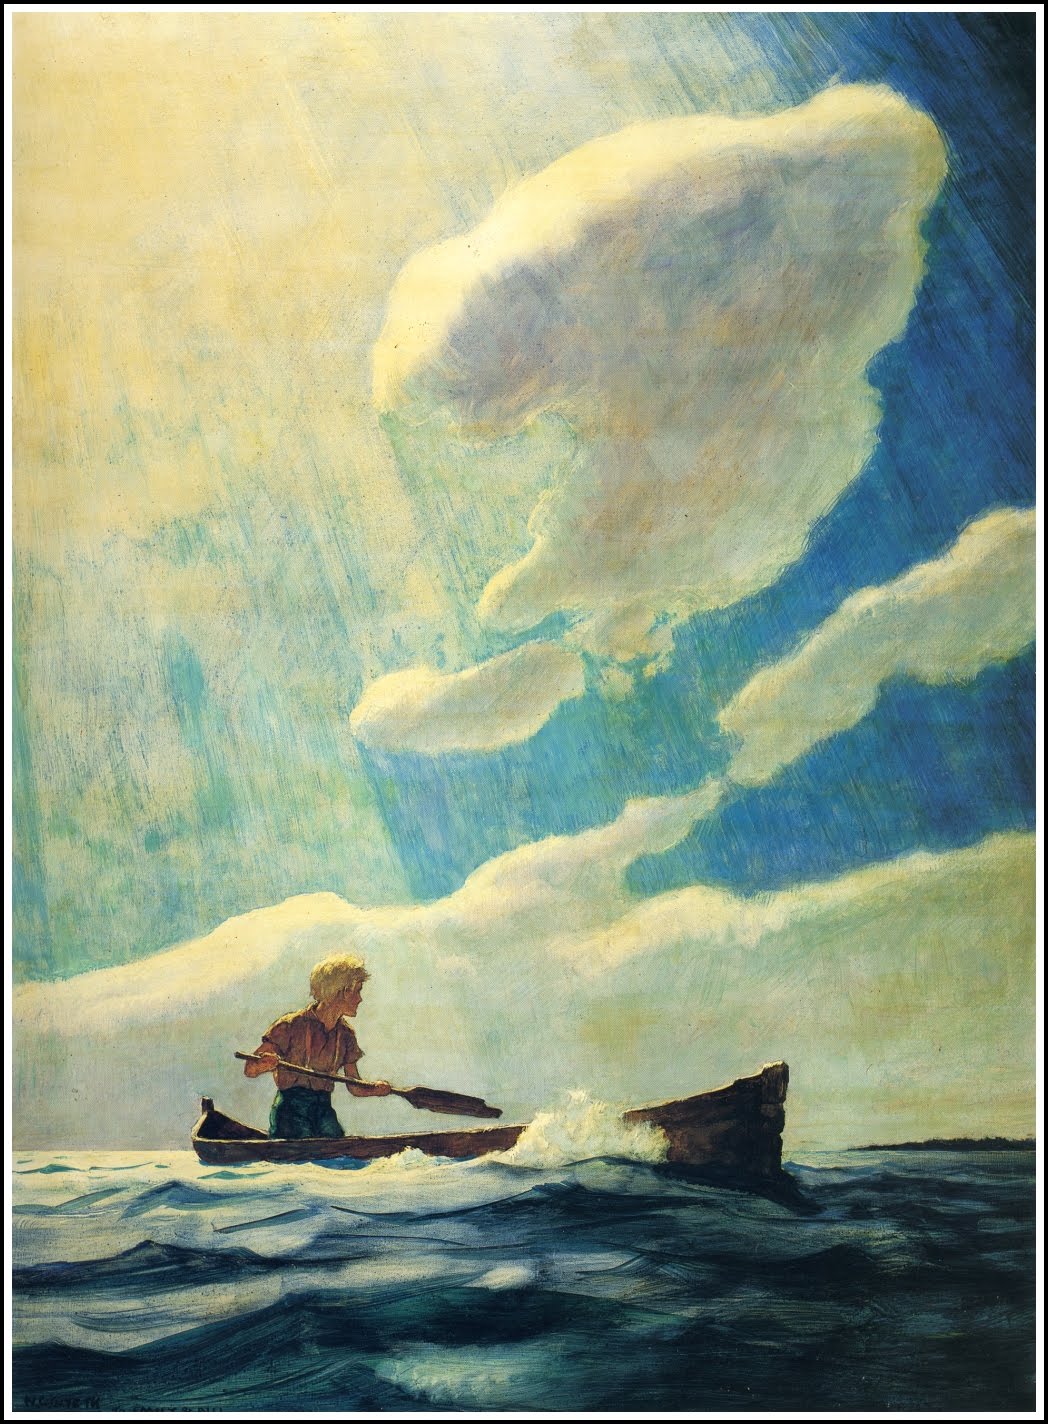 illustration of a boy in a boat on a calm sea with a cloudy sunny sky